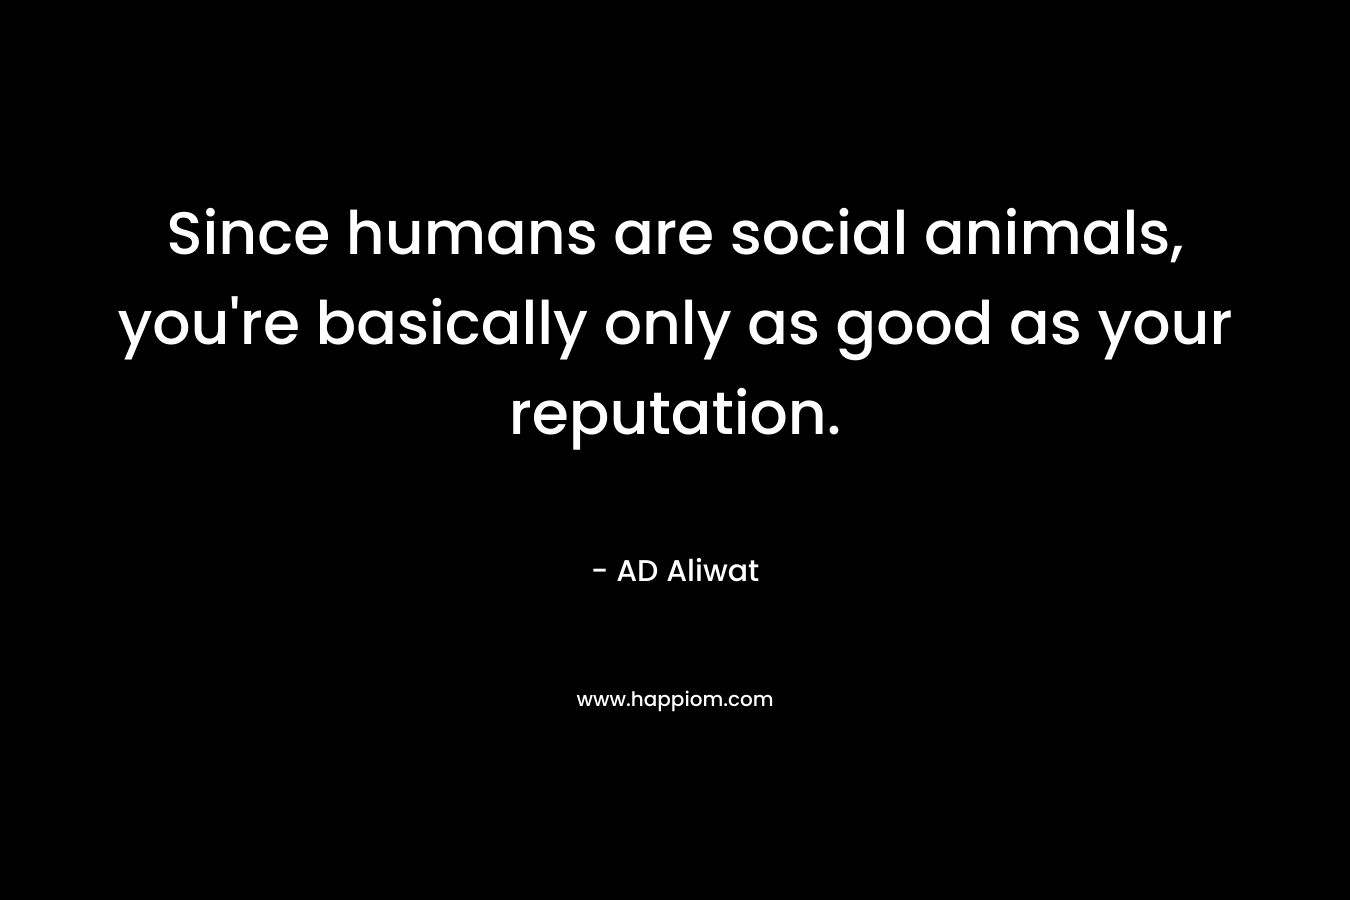 Since humans are social animals, you're basically only as good as your reputation.